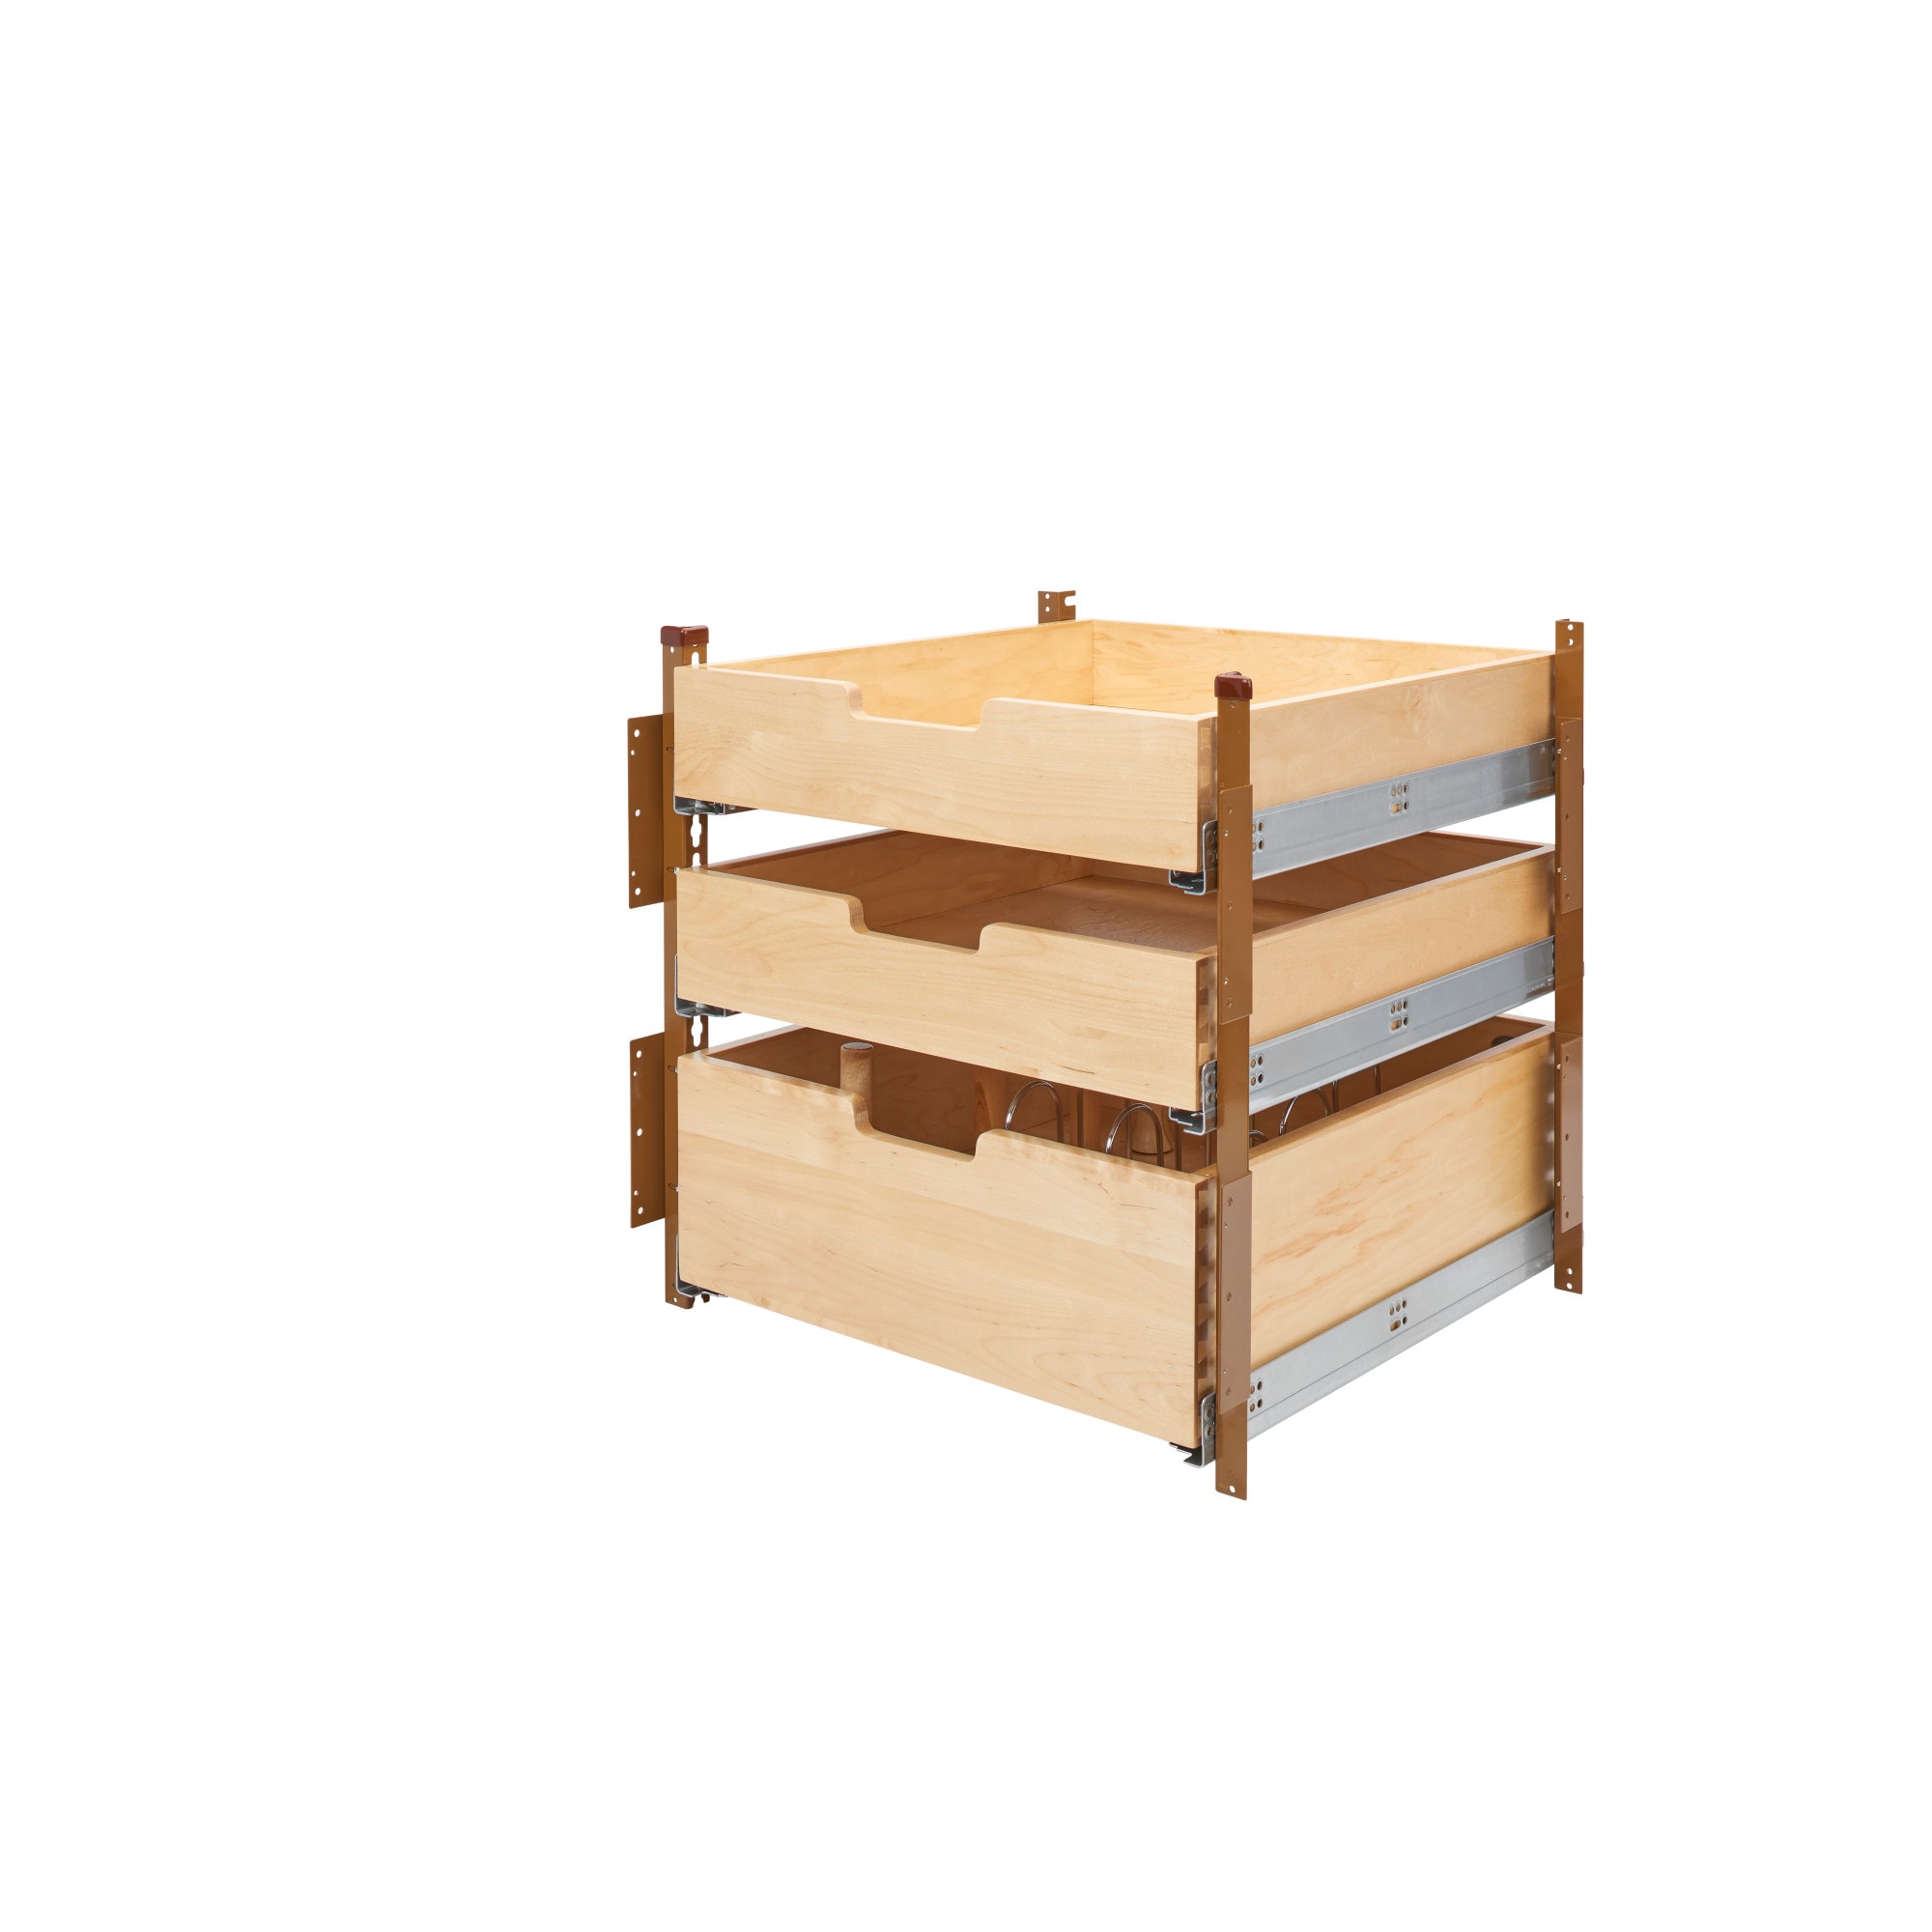 Pull Out Cabinet Shelves  Keystone Wood Specialties